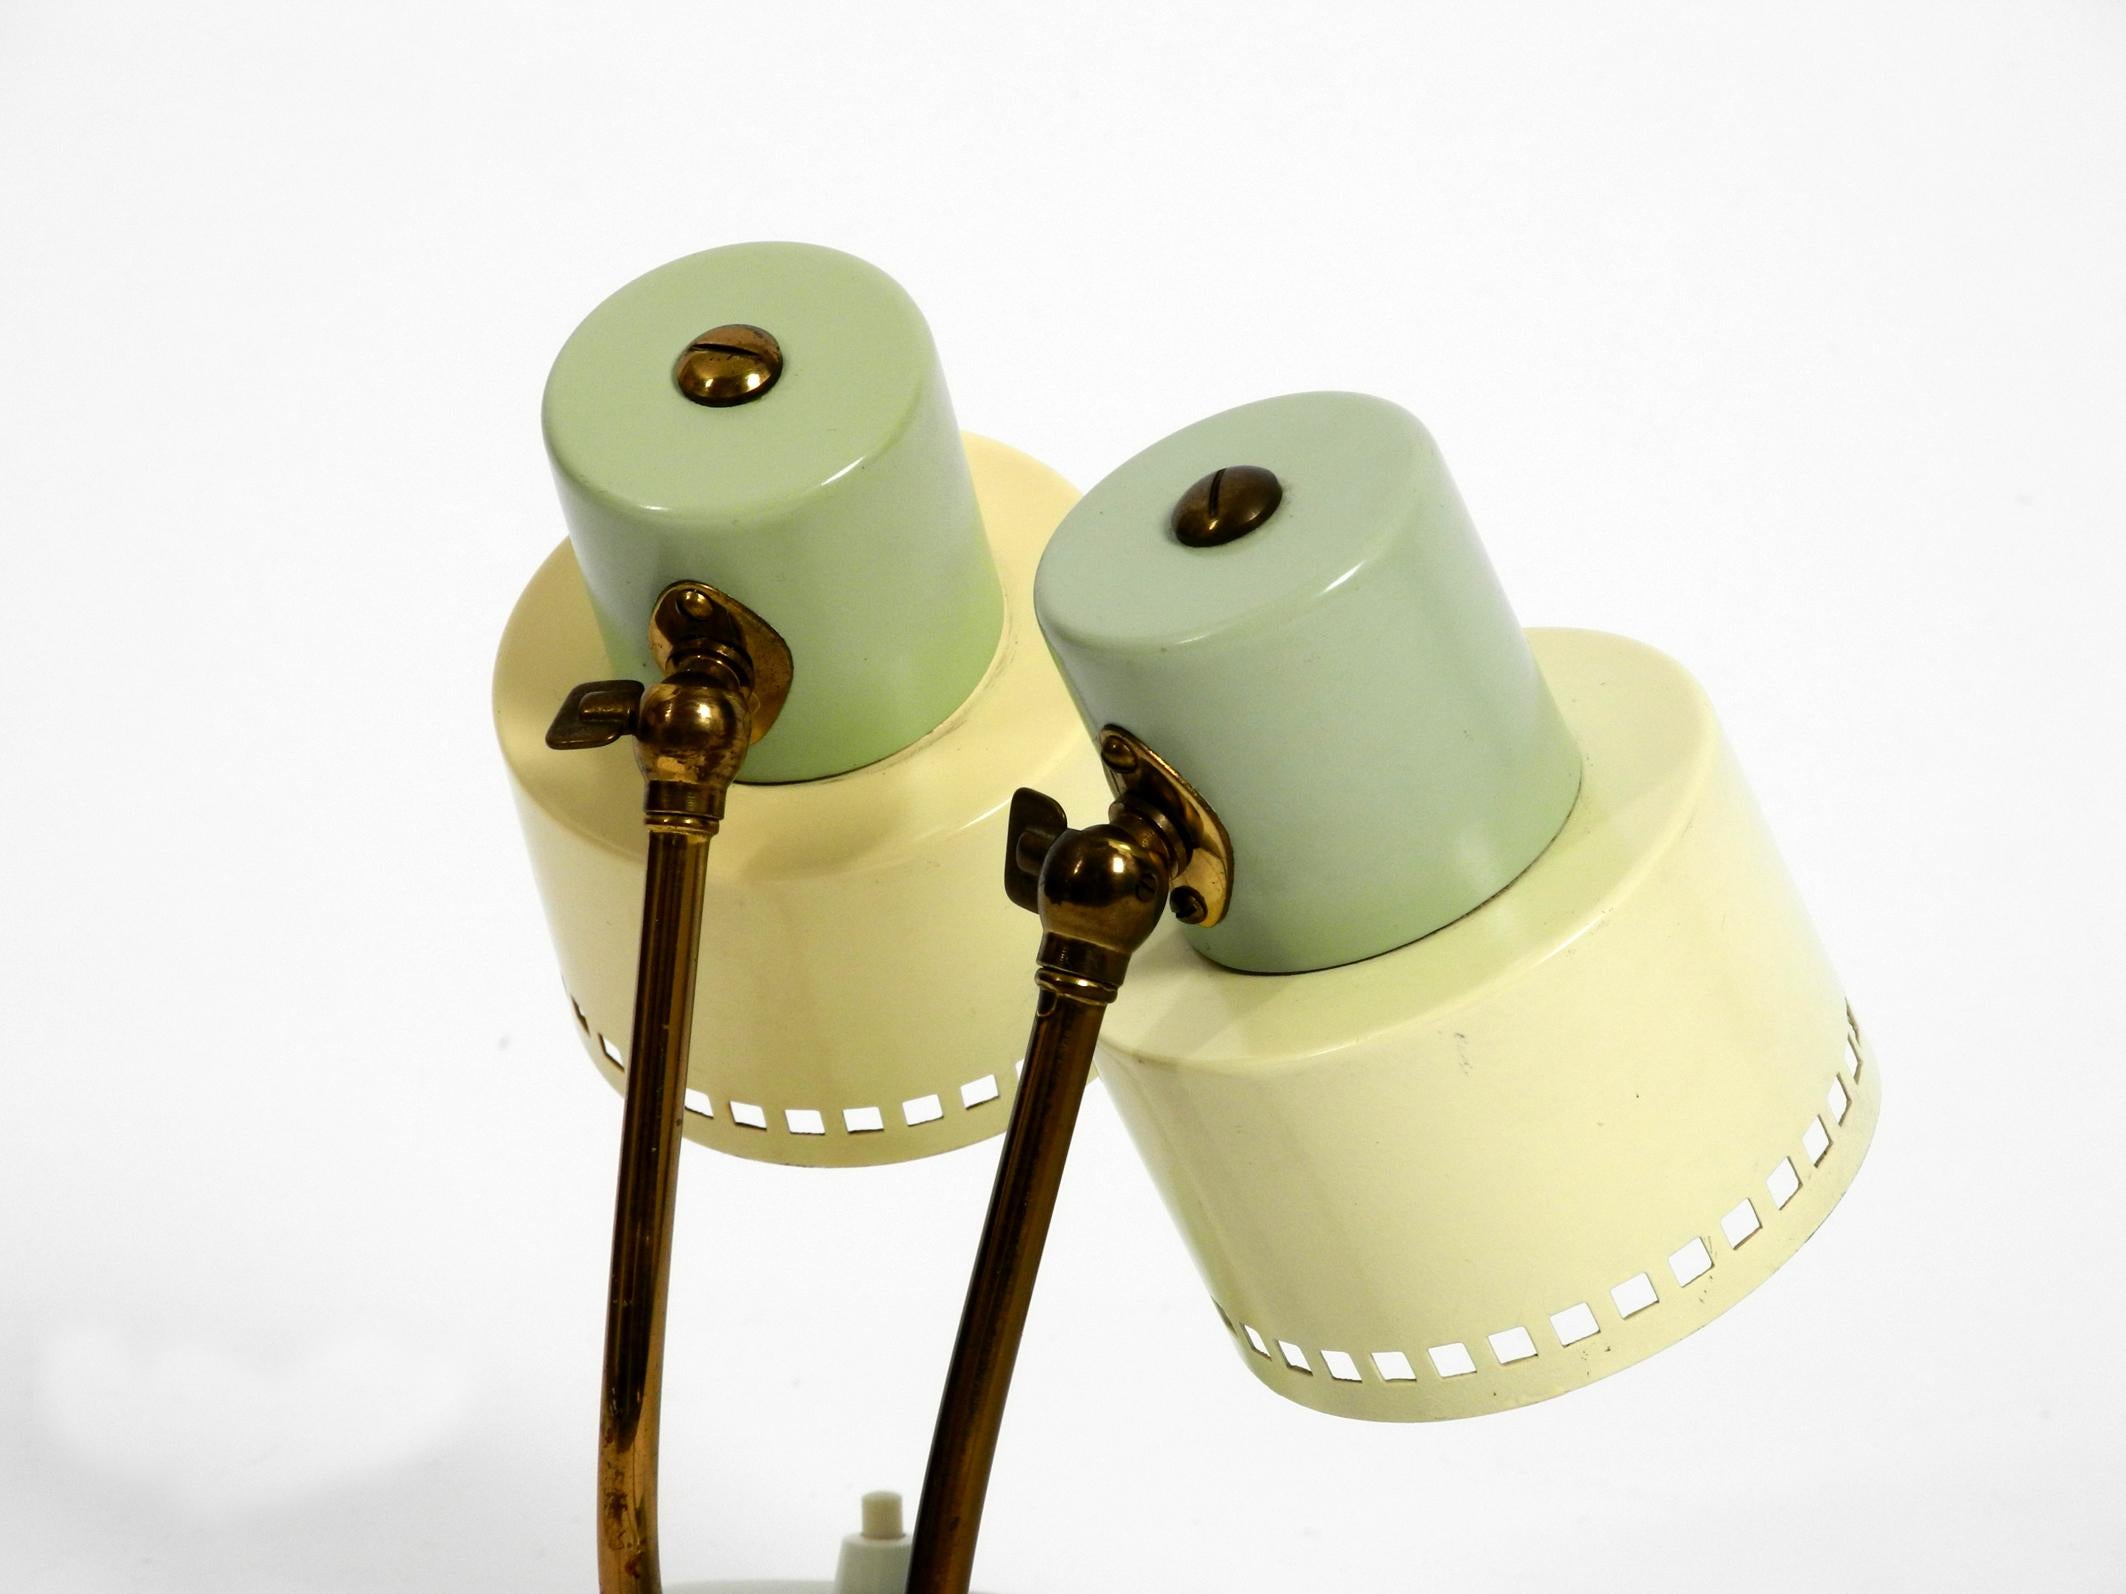 Pair of Beautiful Midcentury Metal Bedside Lamps in Mint Green and Yellow 1